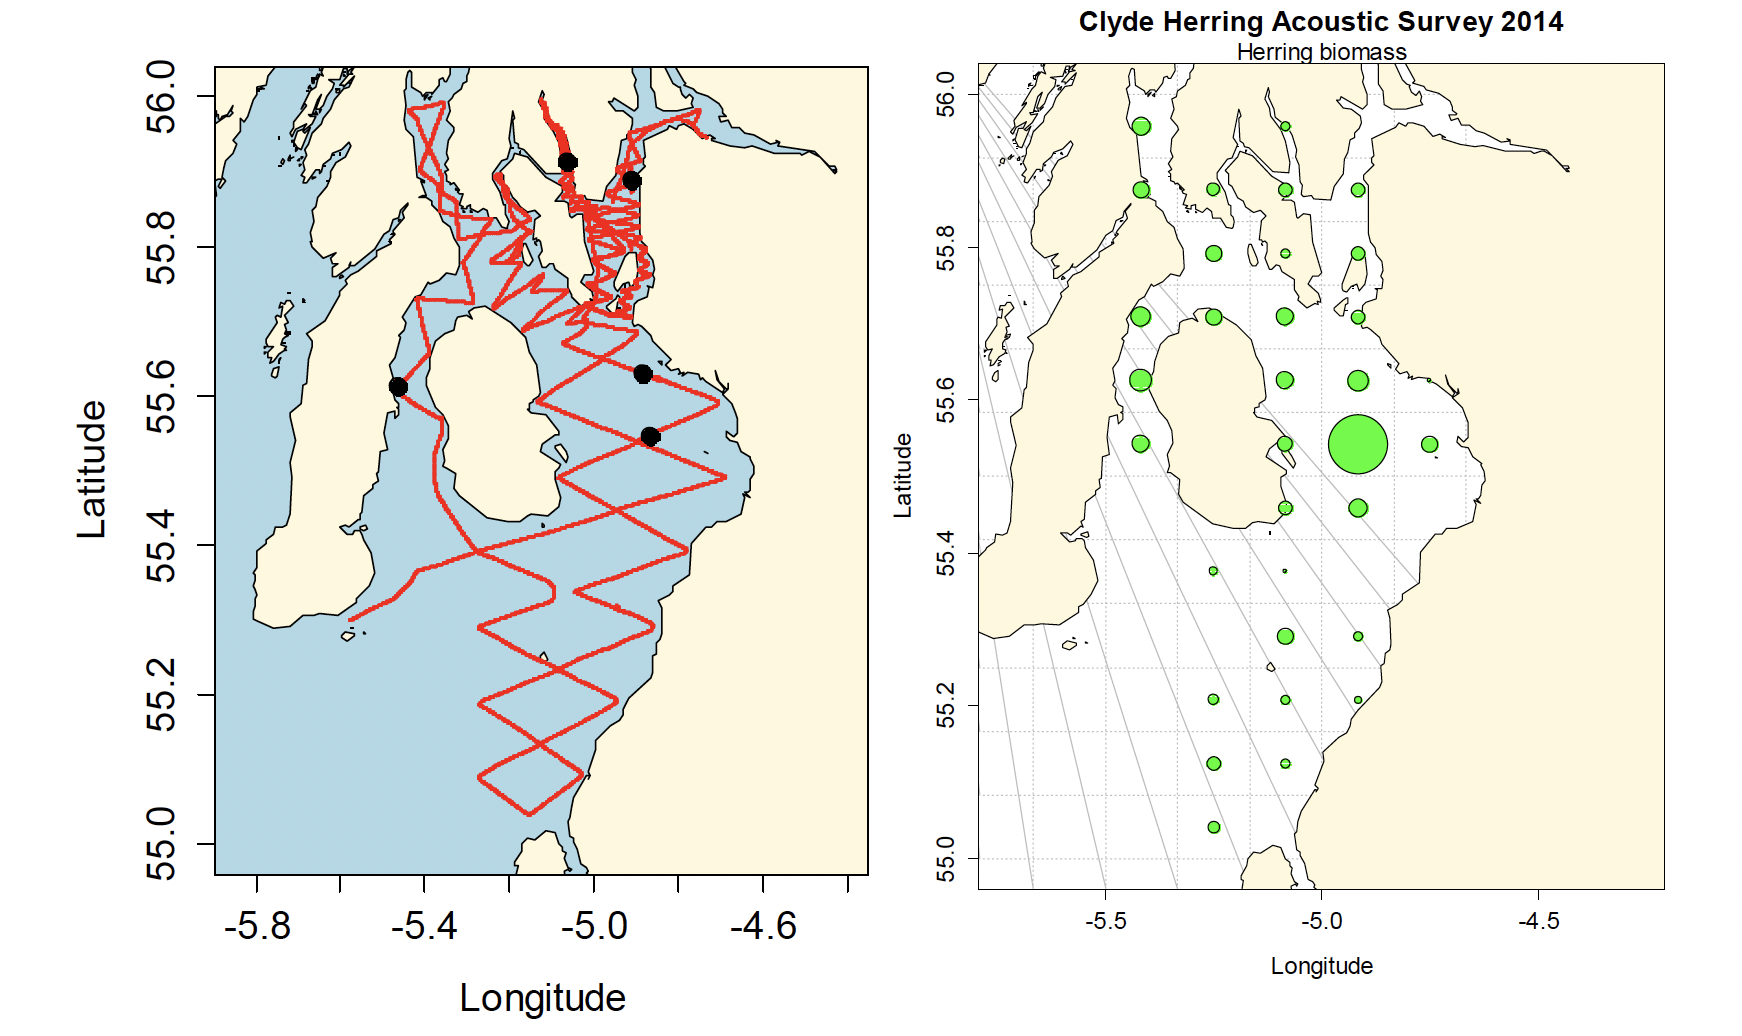 Clyde pelagic acoustic survey maps in 2014. Left map shows cruise track (red line) and haul locations (black dots) for MRV Alba na Mara. Right panel shows distribution of herring biomass